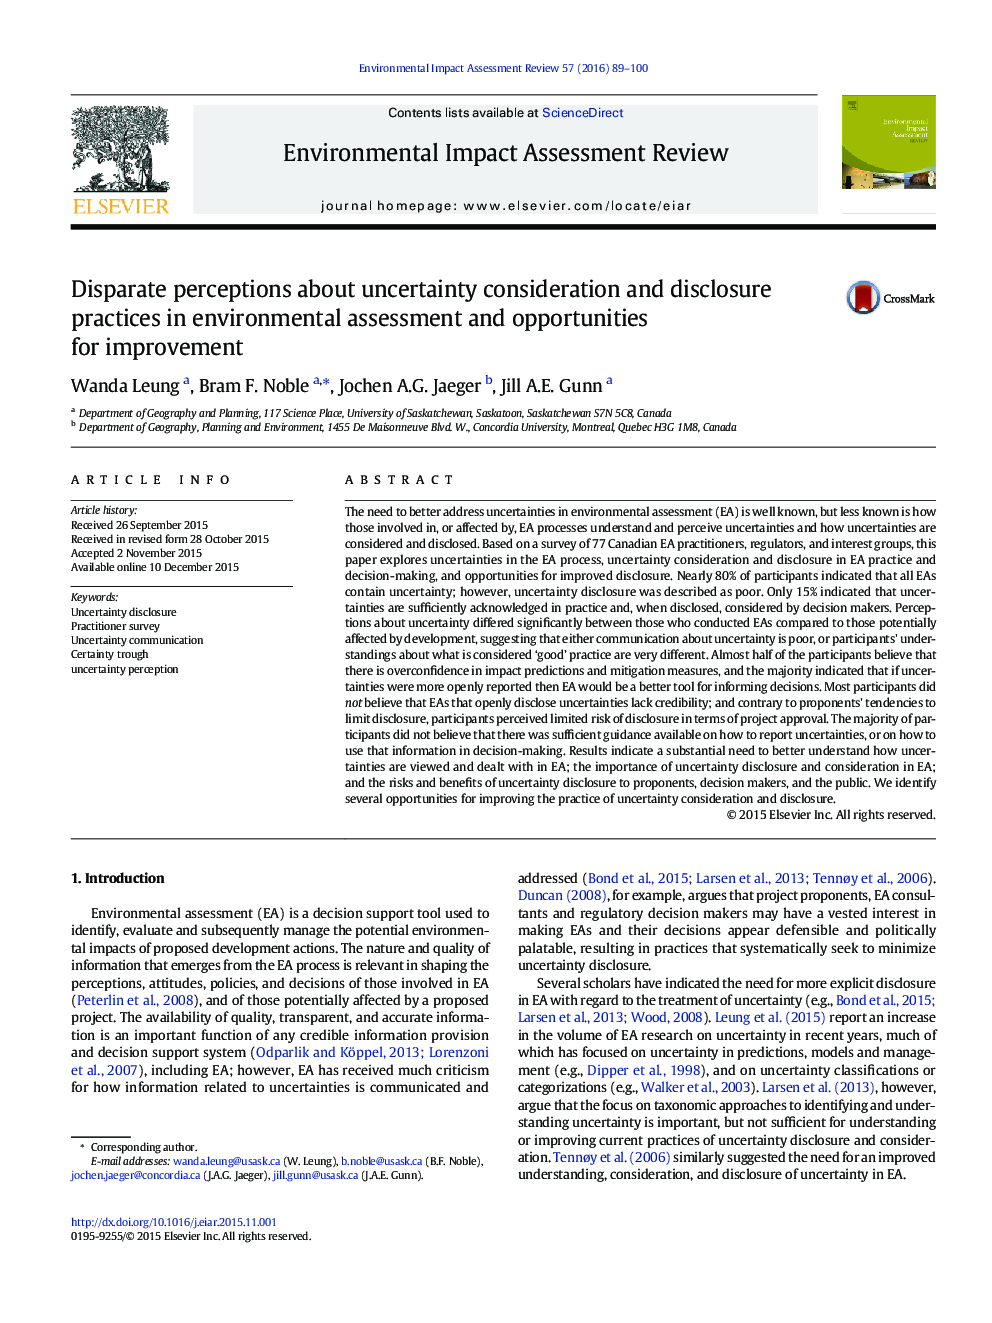 Disparate perceptions about uncertainty consideration and disclosure practices in environmental assessment and opportunities for improvement